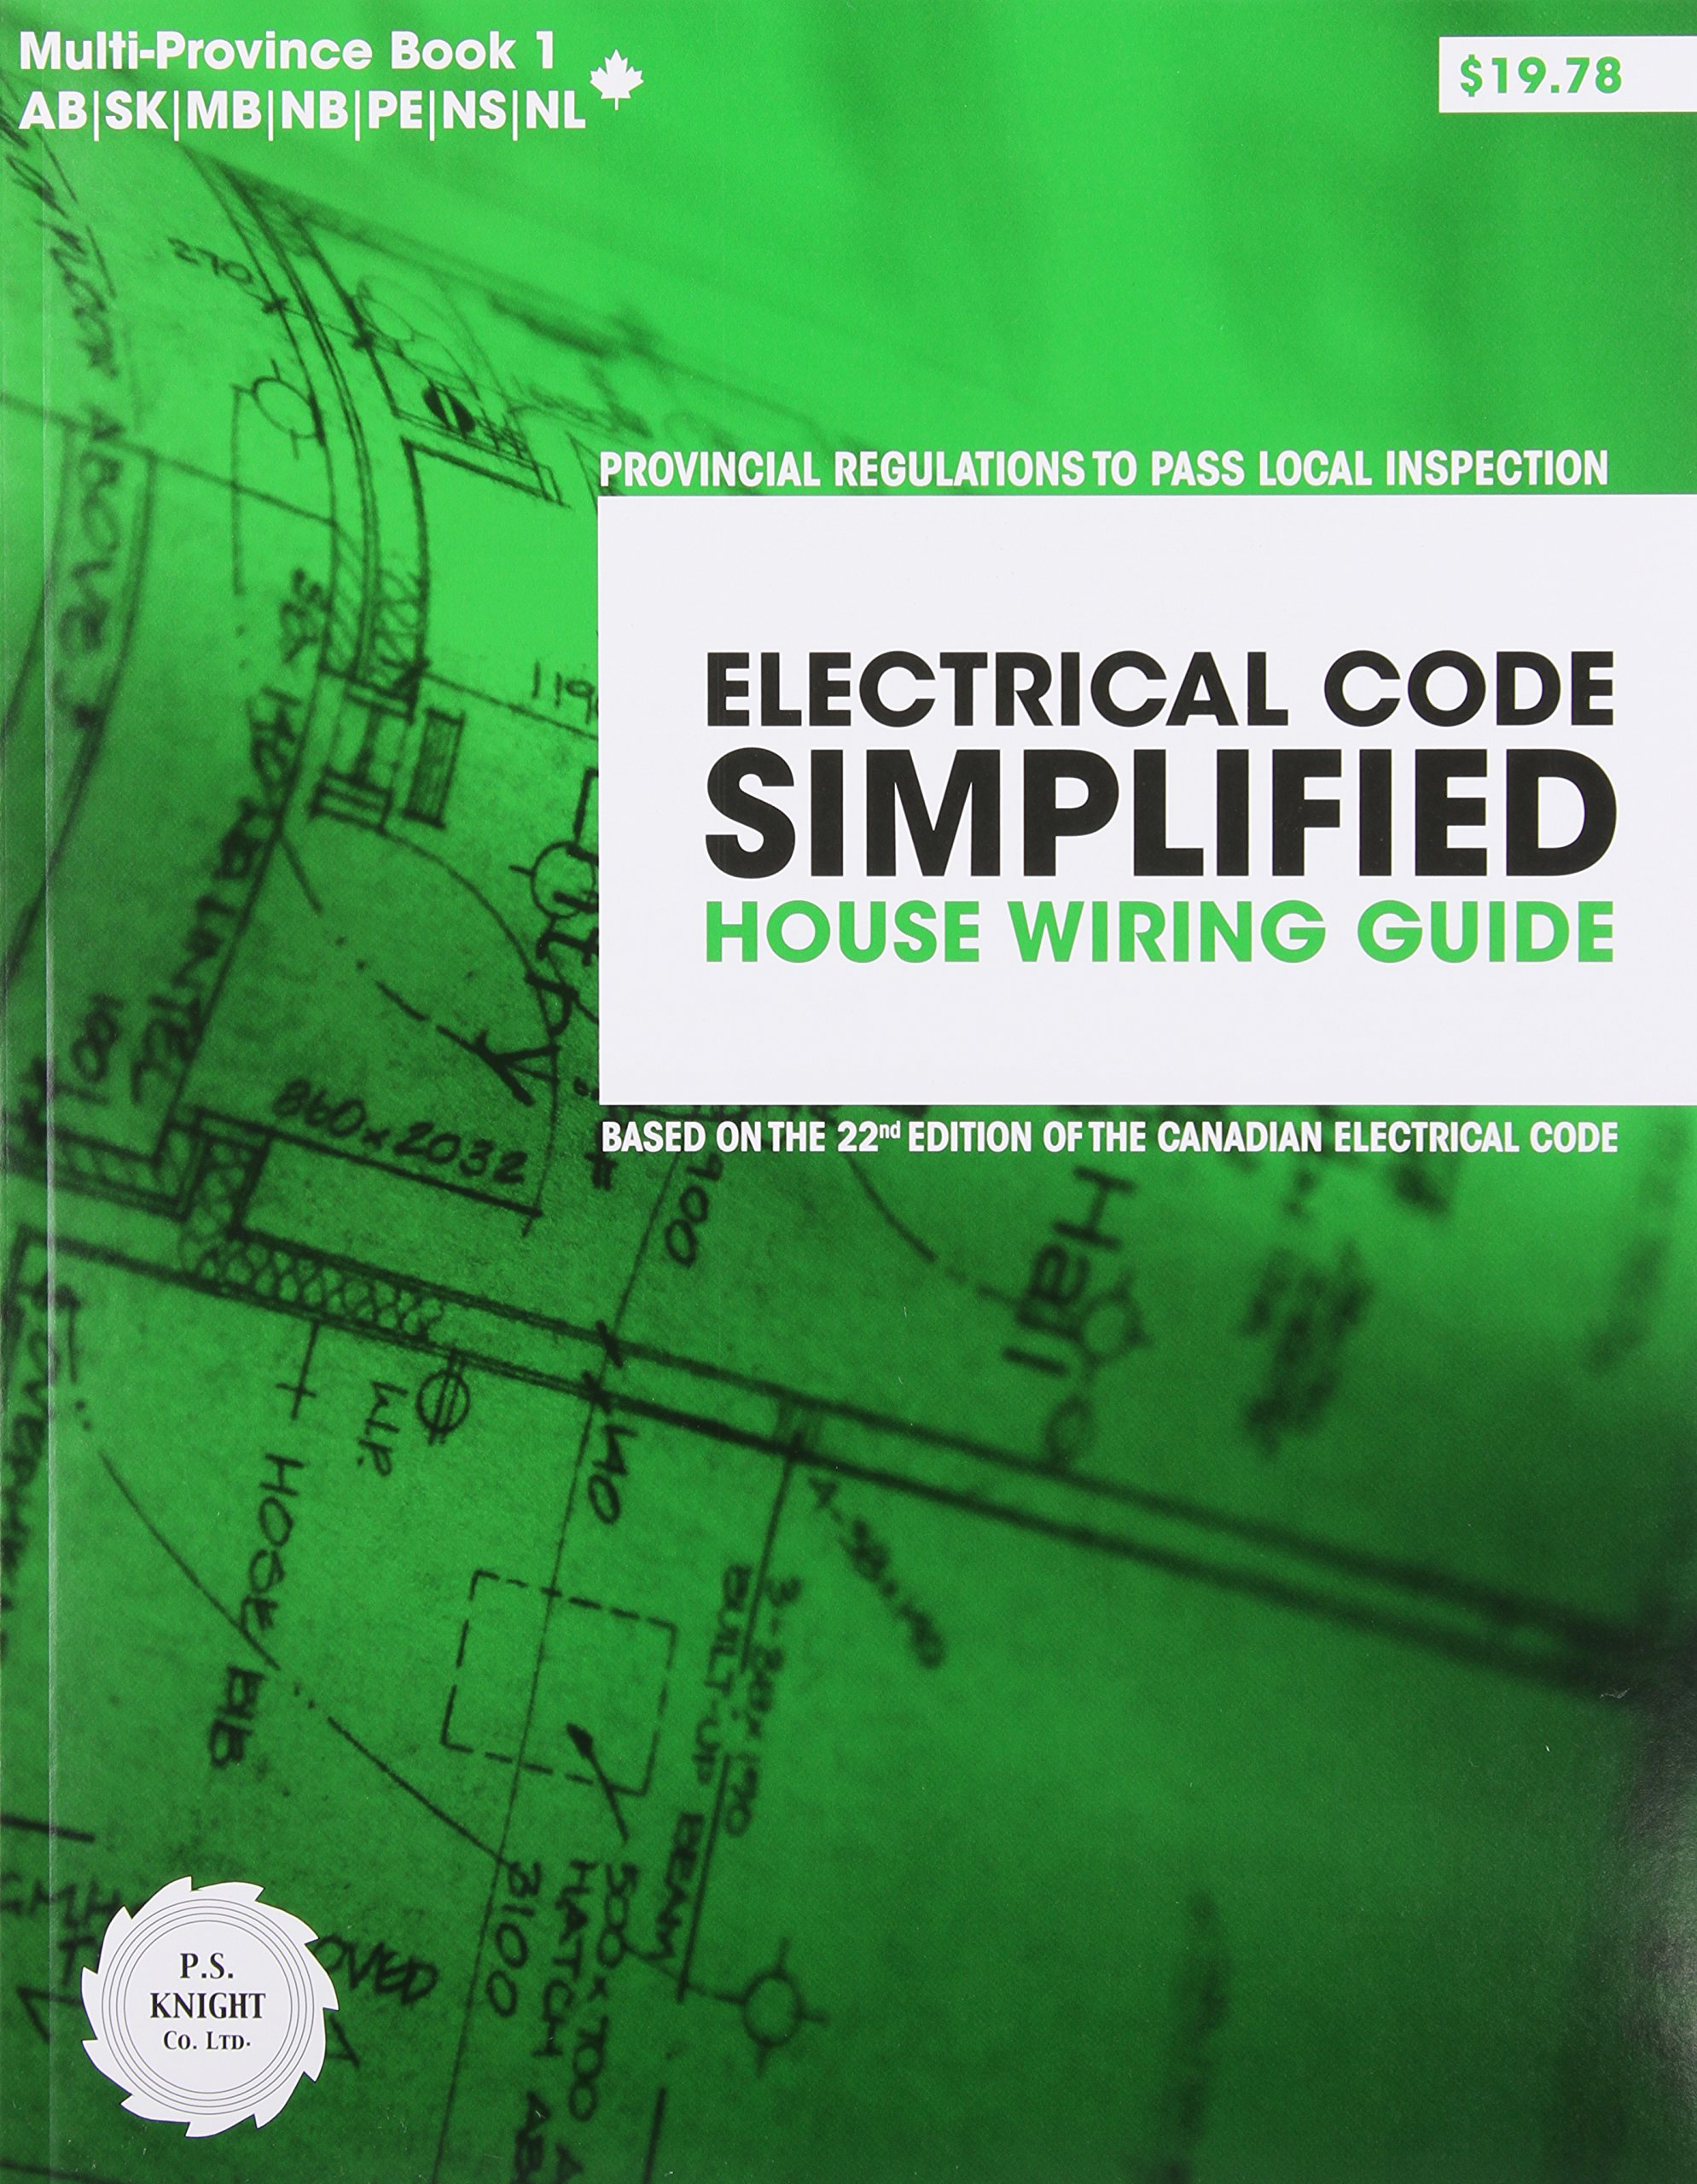 Electrical code simplified house wiring guide